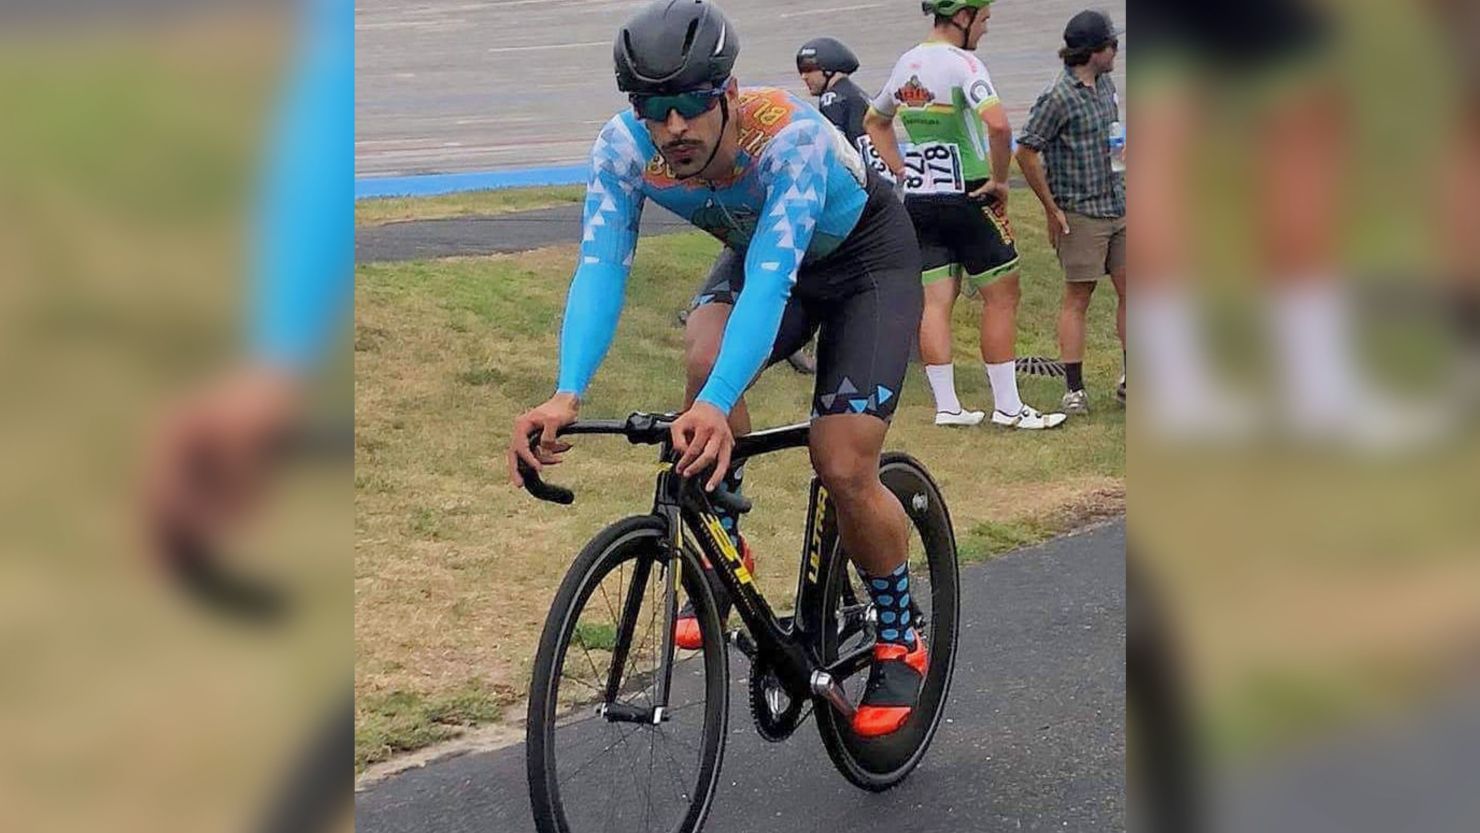 Ethan Boyes, a championship cyclist, was killed after being hit by a car in San Francisco on Tuesday.